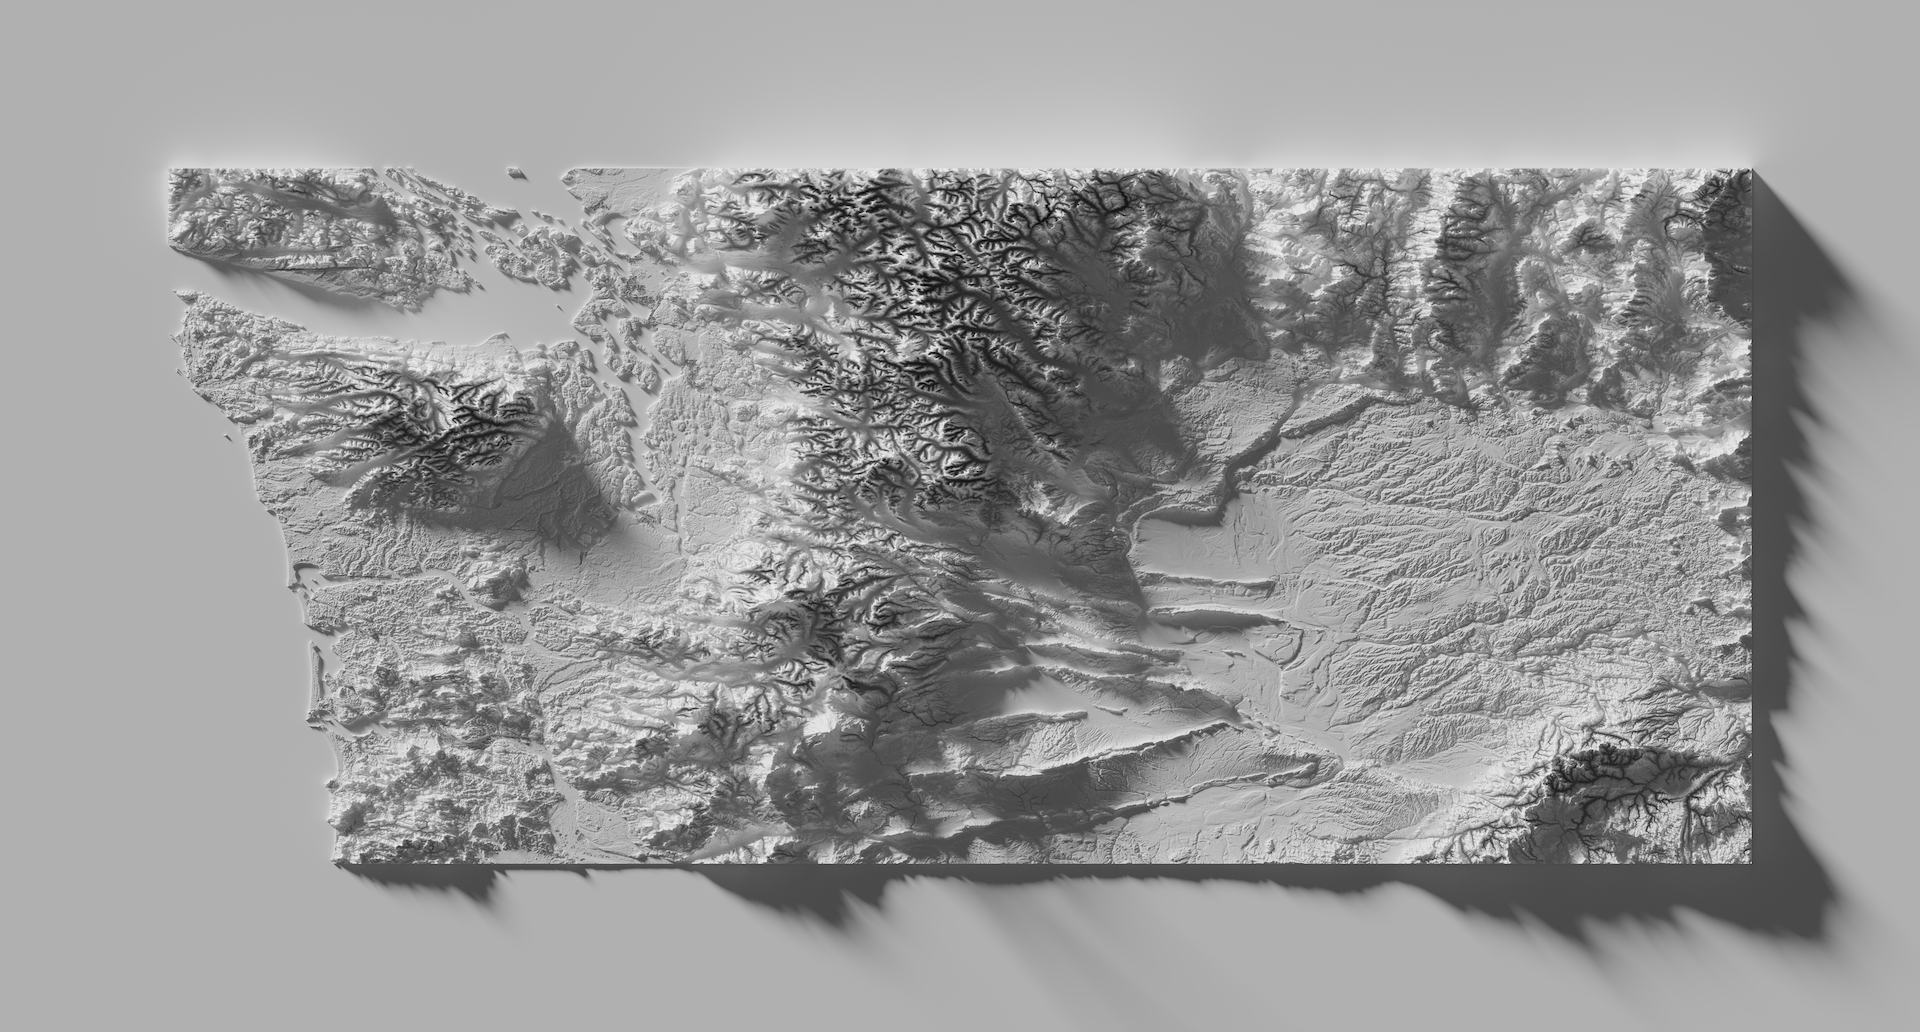 Rendered relief map of WA